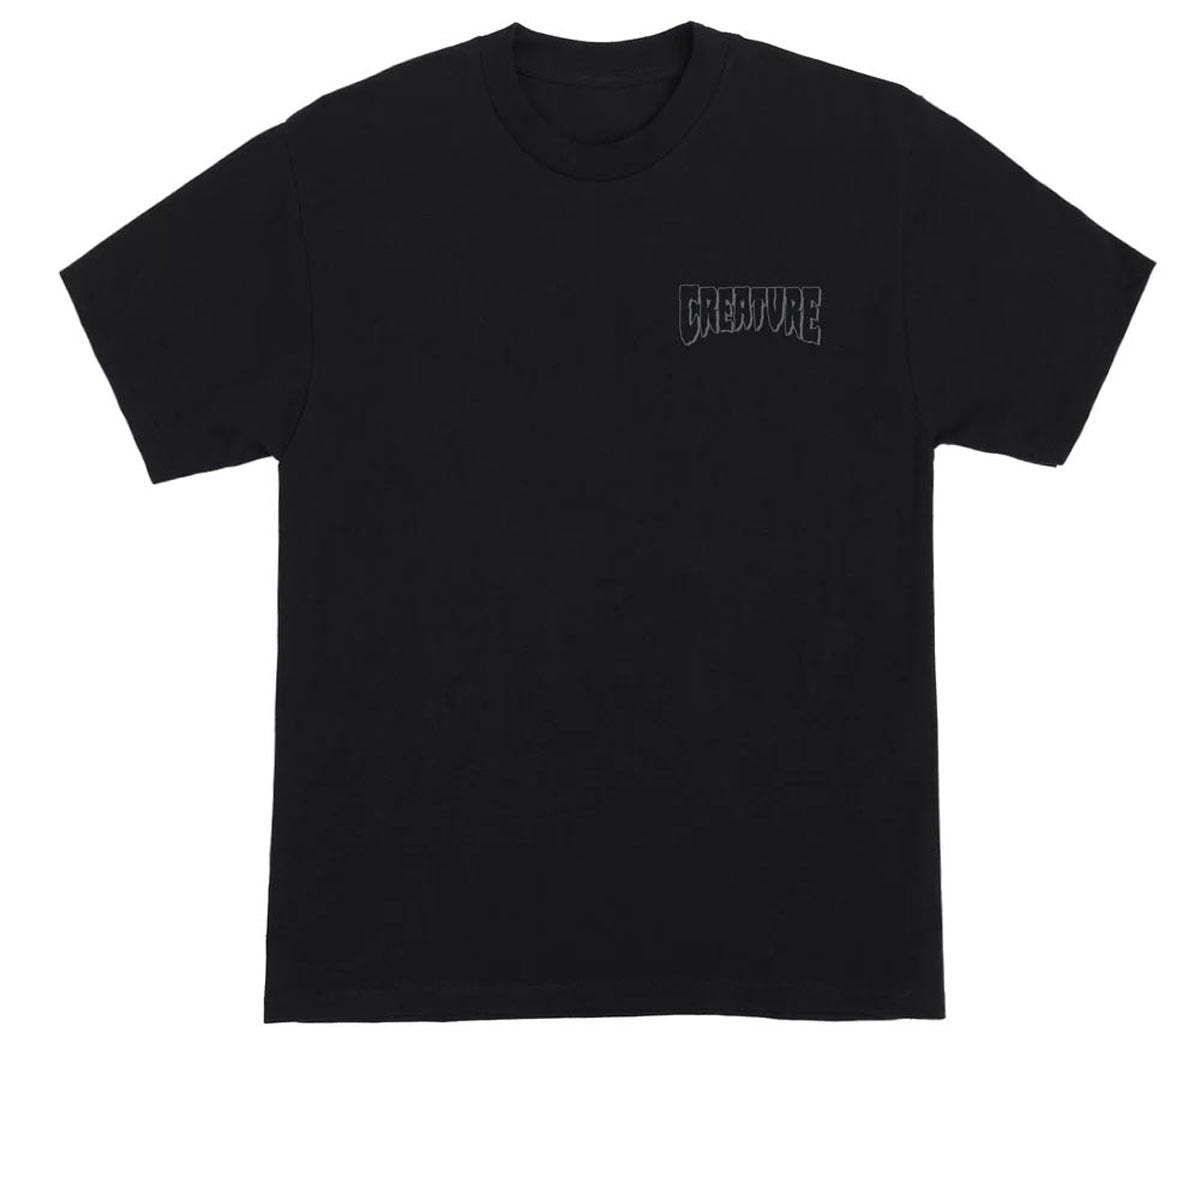 Creature Forever Undead Relic T-Shirt - Black image 2